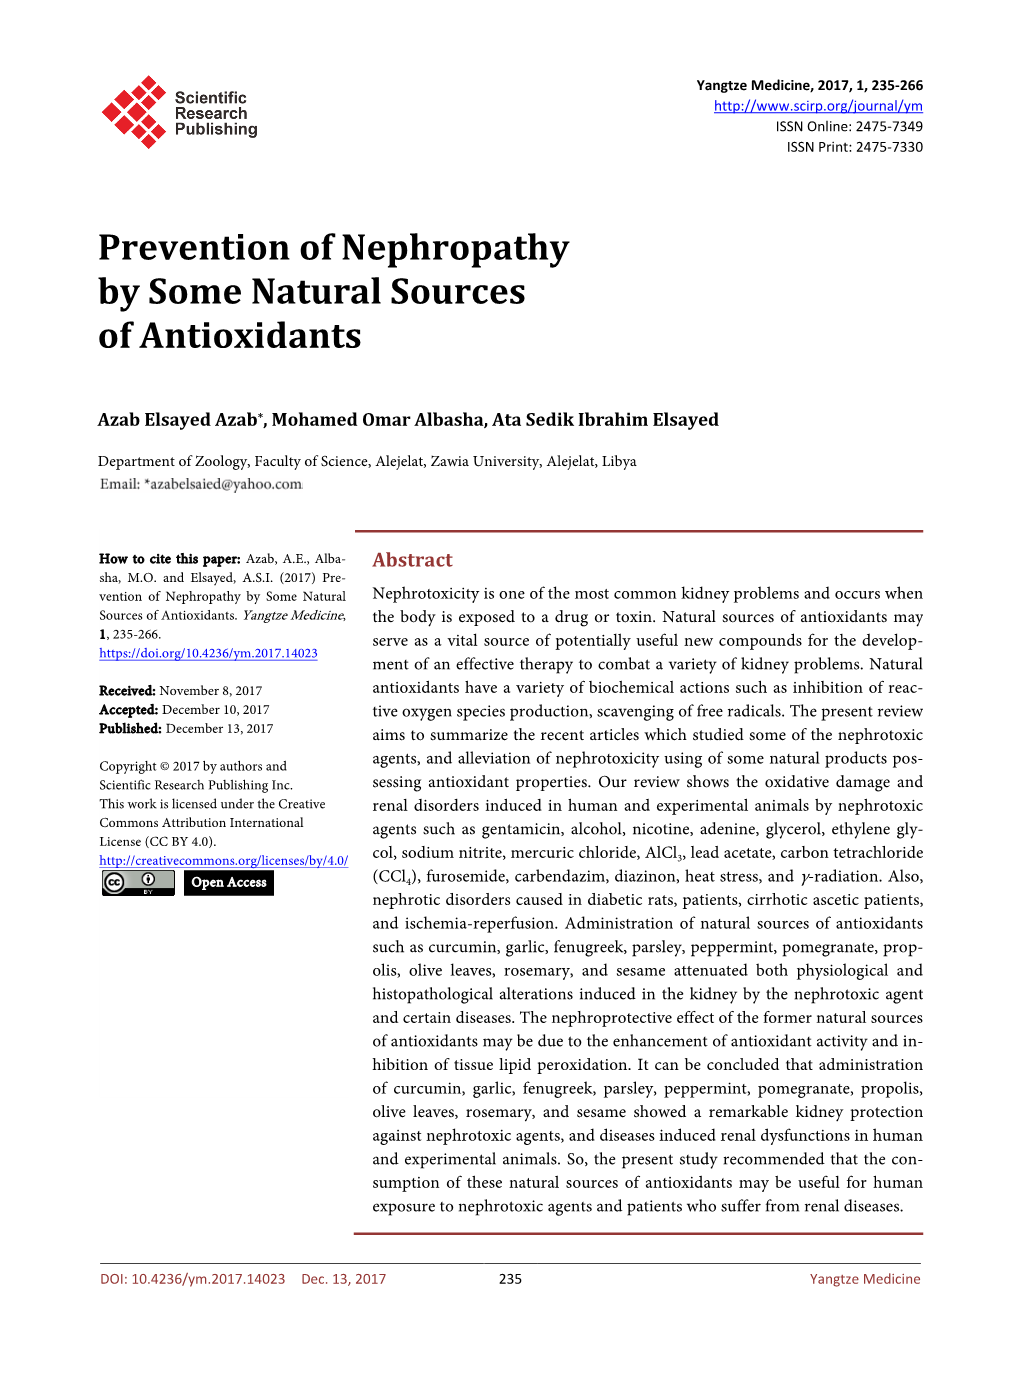 Prevention of Nephropathy by Some Natural Sources of Antioxidants